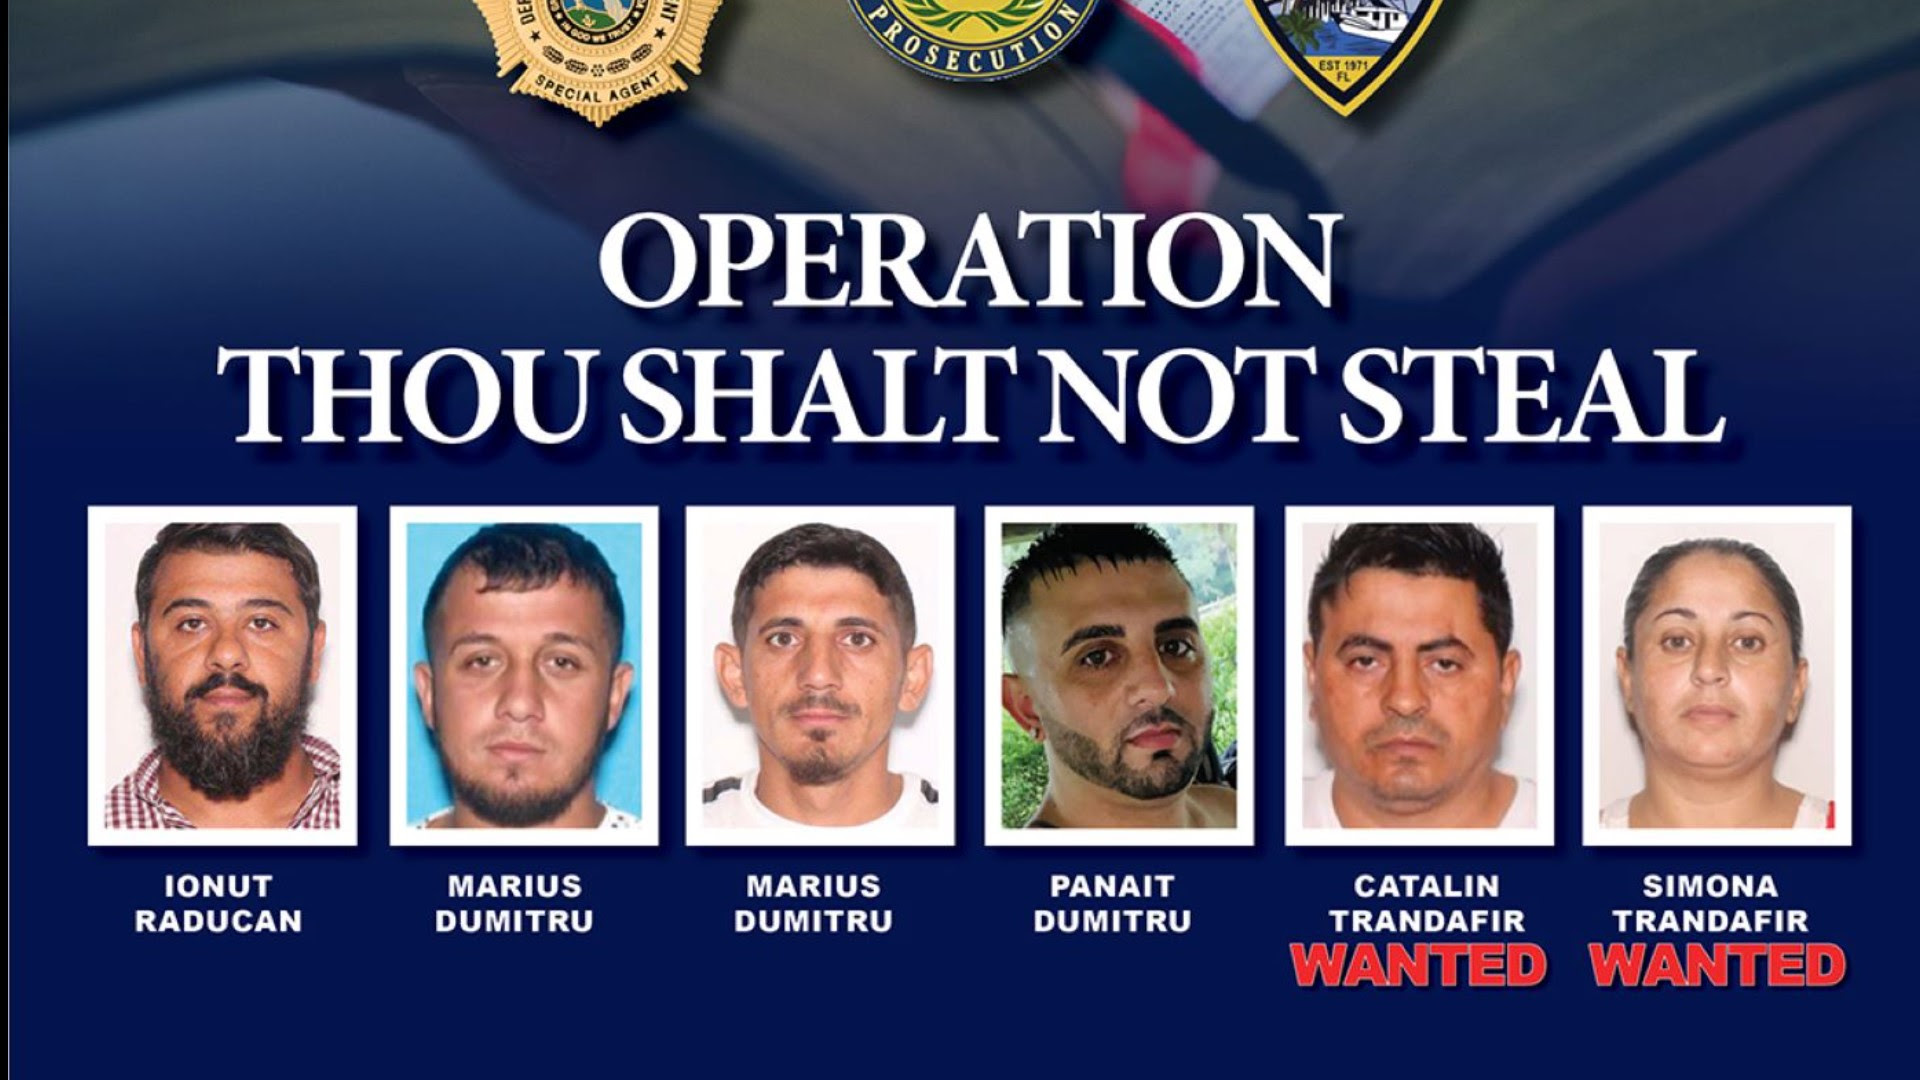  A series of mug shots beneath the words: “Operation thou shalt not steal”